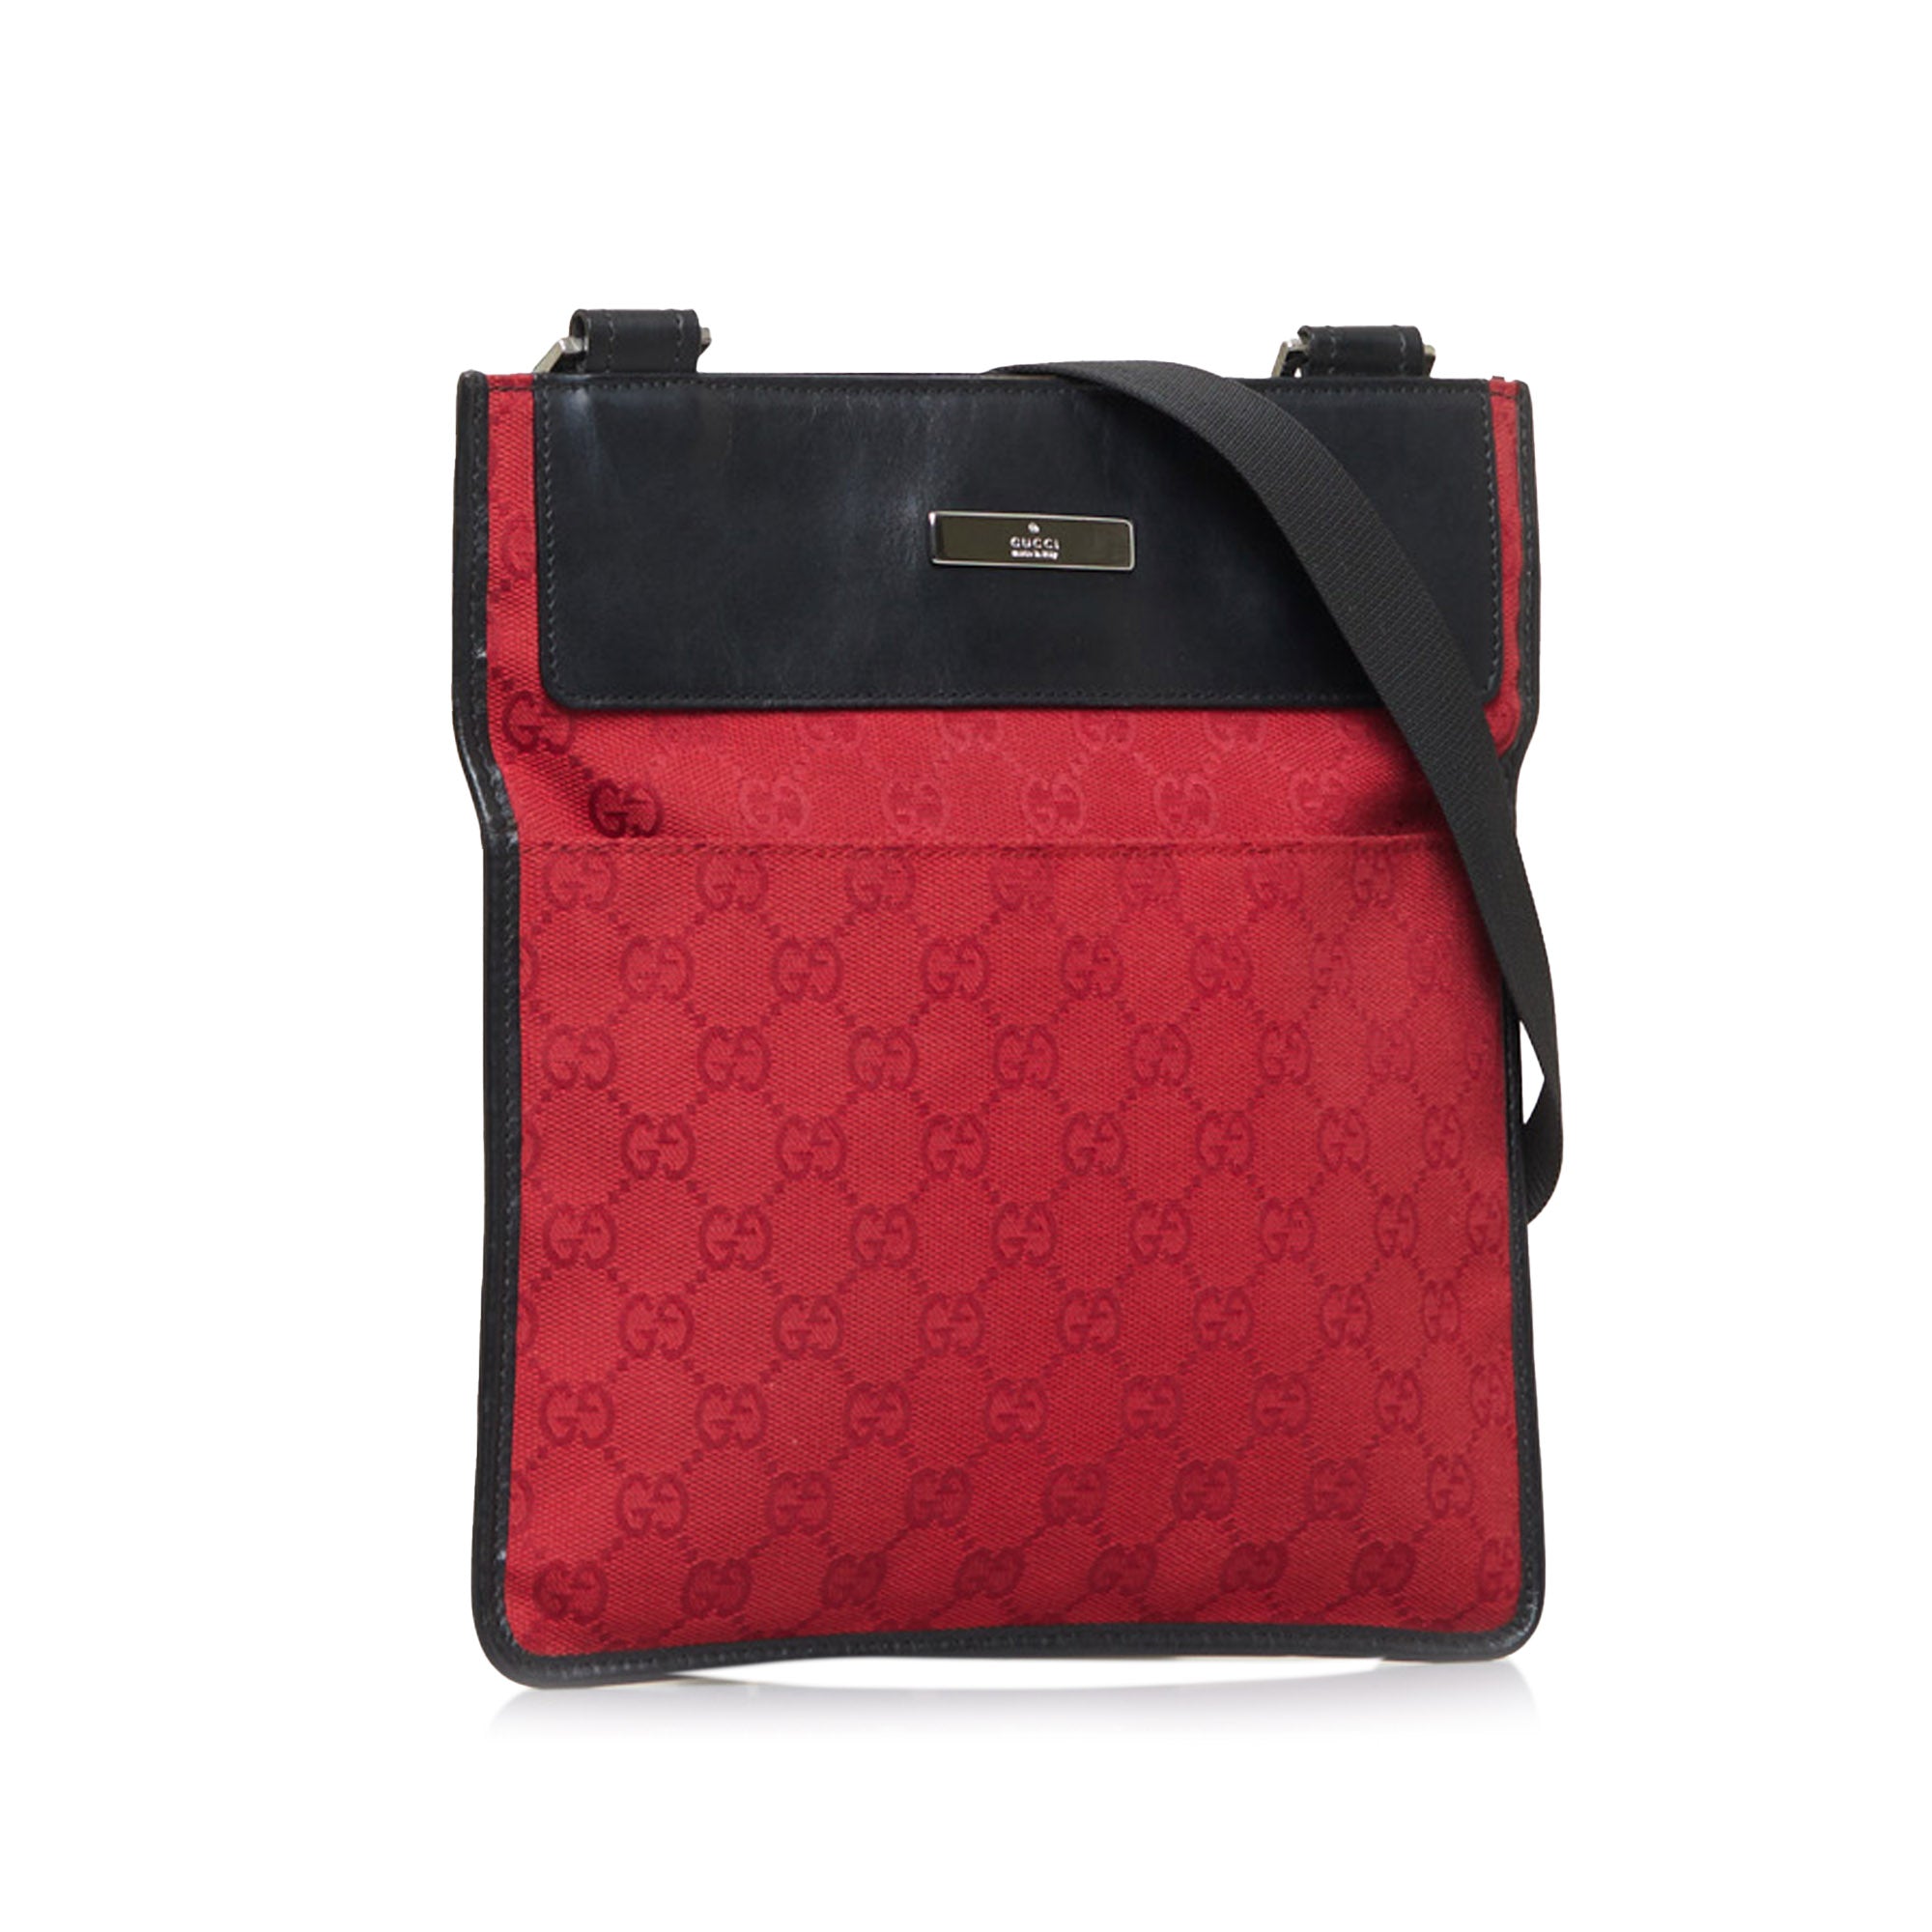 Gucci, Bags, Gucci Red Canvas And Patent Leather Bag